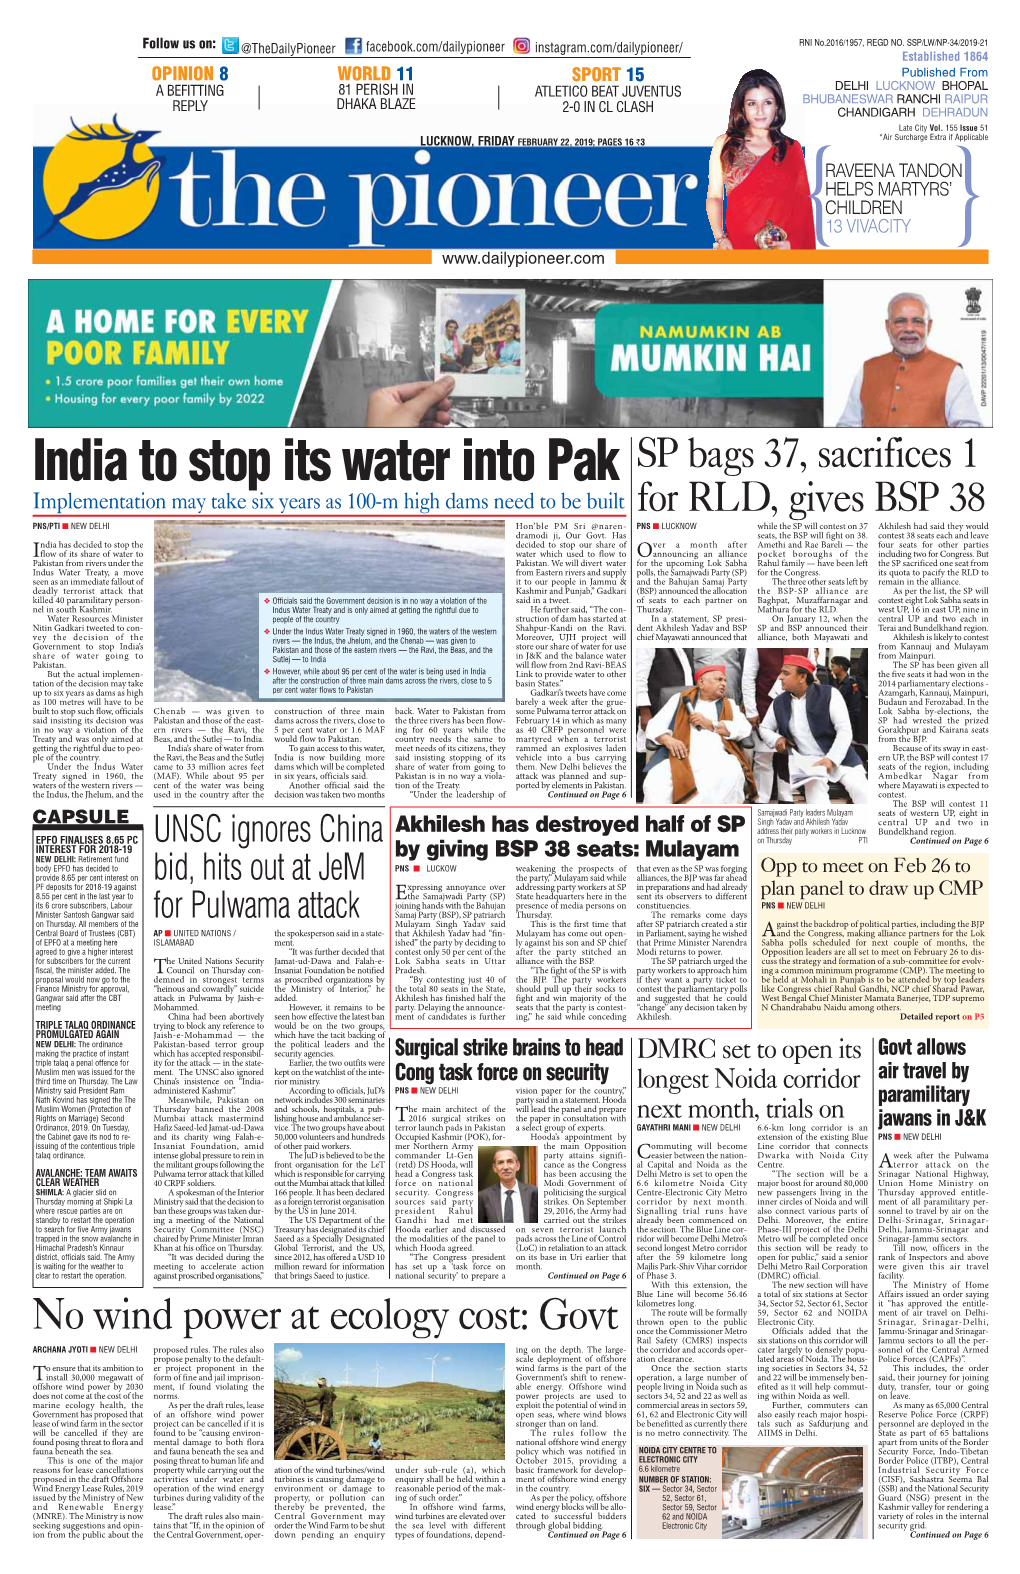 India to Stop Its Water Into